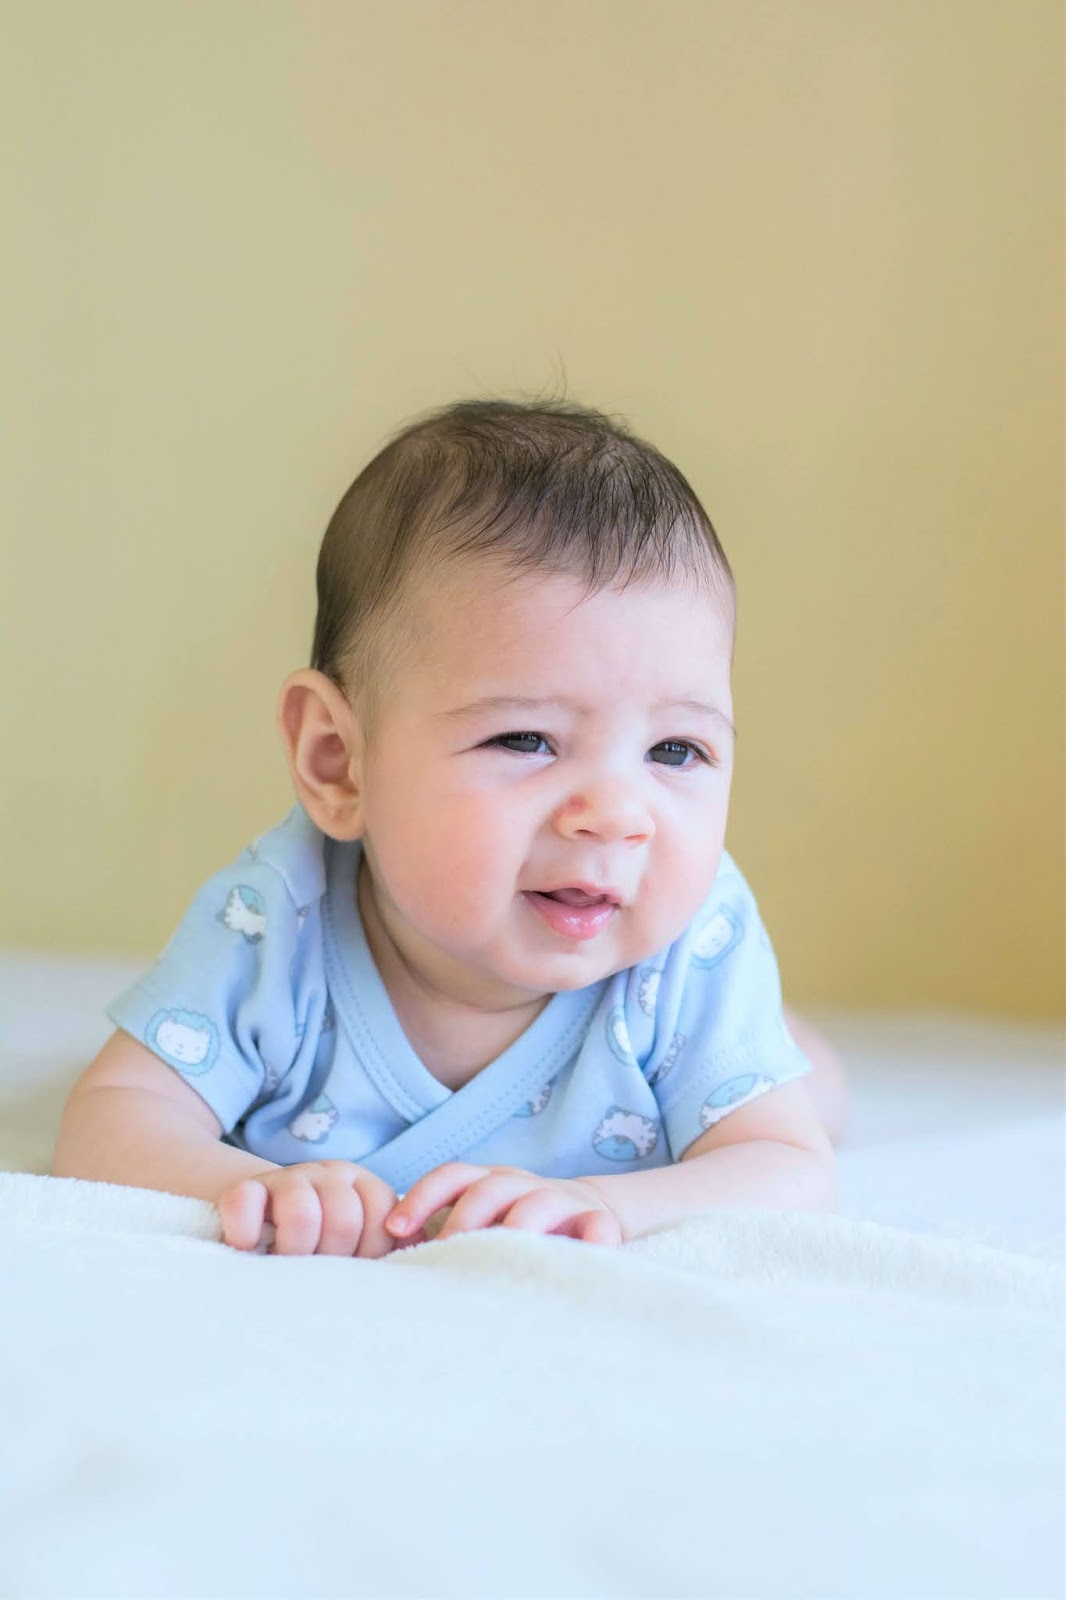 Sweet Baby Hd Photos Wallpapers Download Free Image Zone